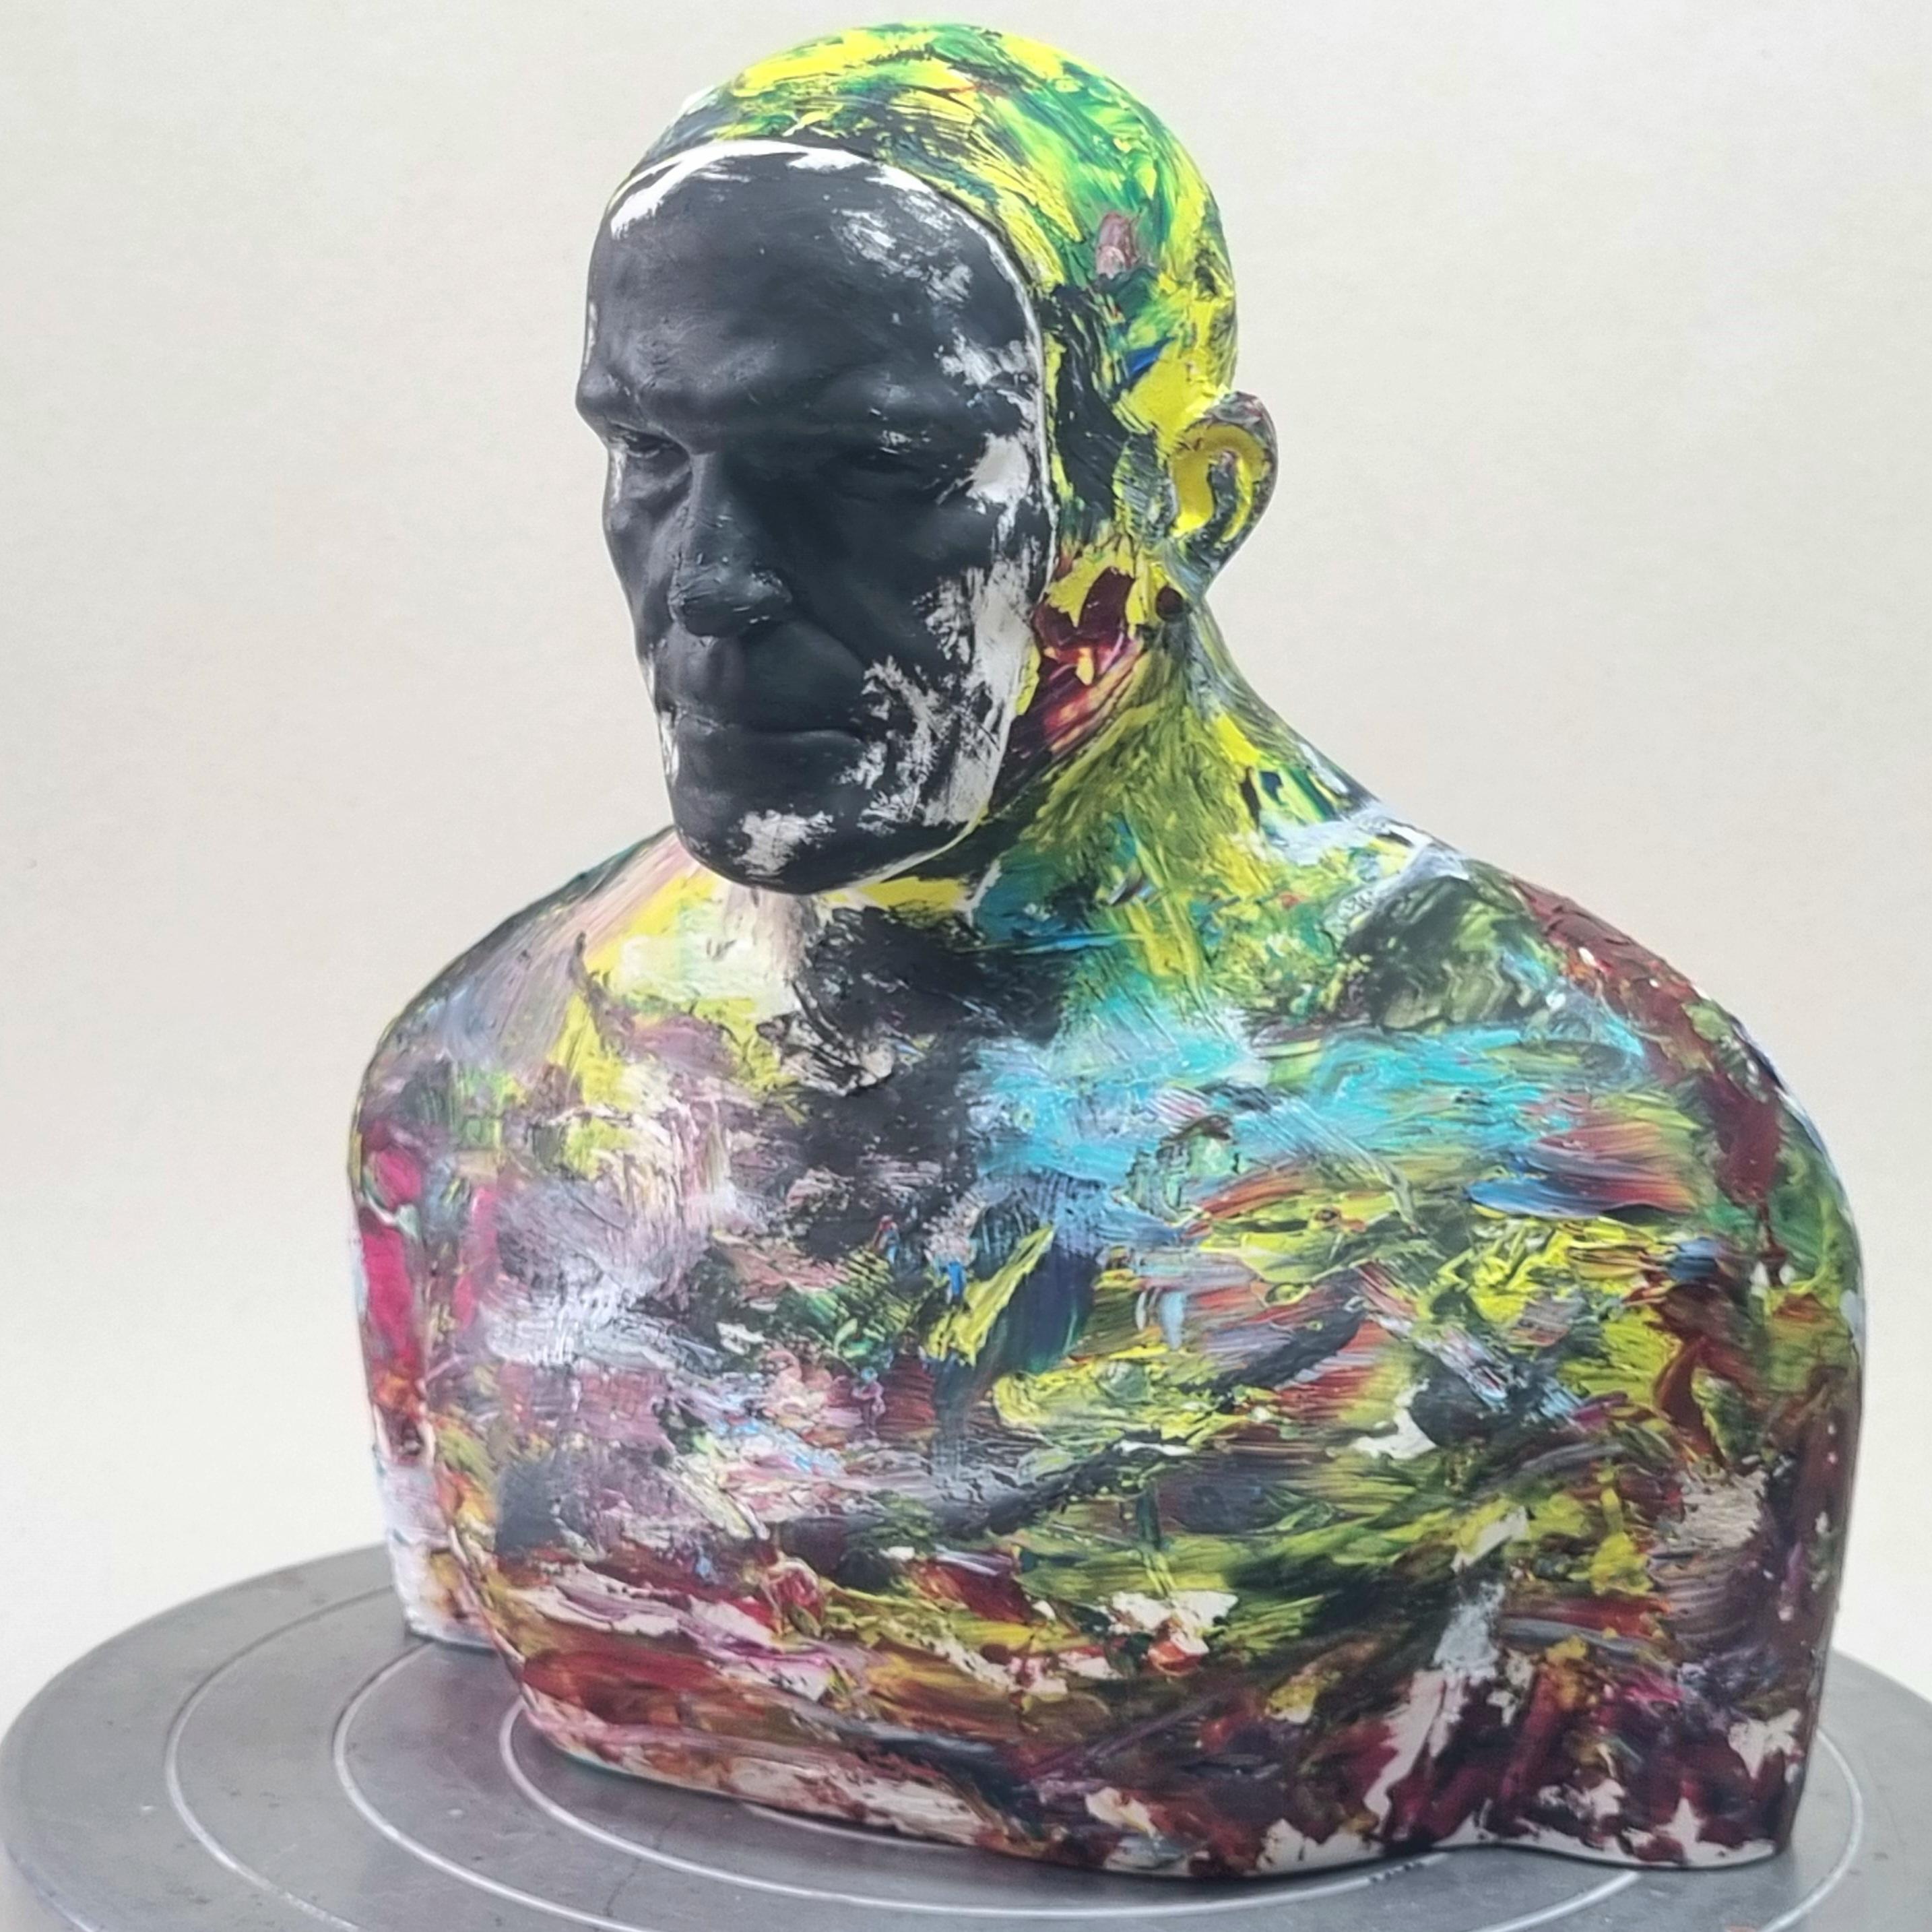 The sculpture was created and shaped by the artist using Acrylic One (which is an acrylic casting resin connection). The artist then painted this sculpture expressively with oil paint

Tomasz Bielak born in Lublin in 1967. He graduated  of The